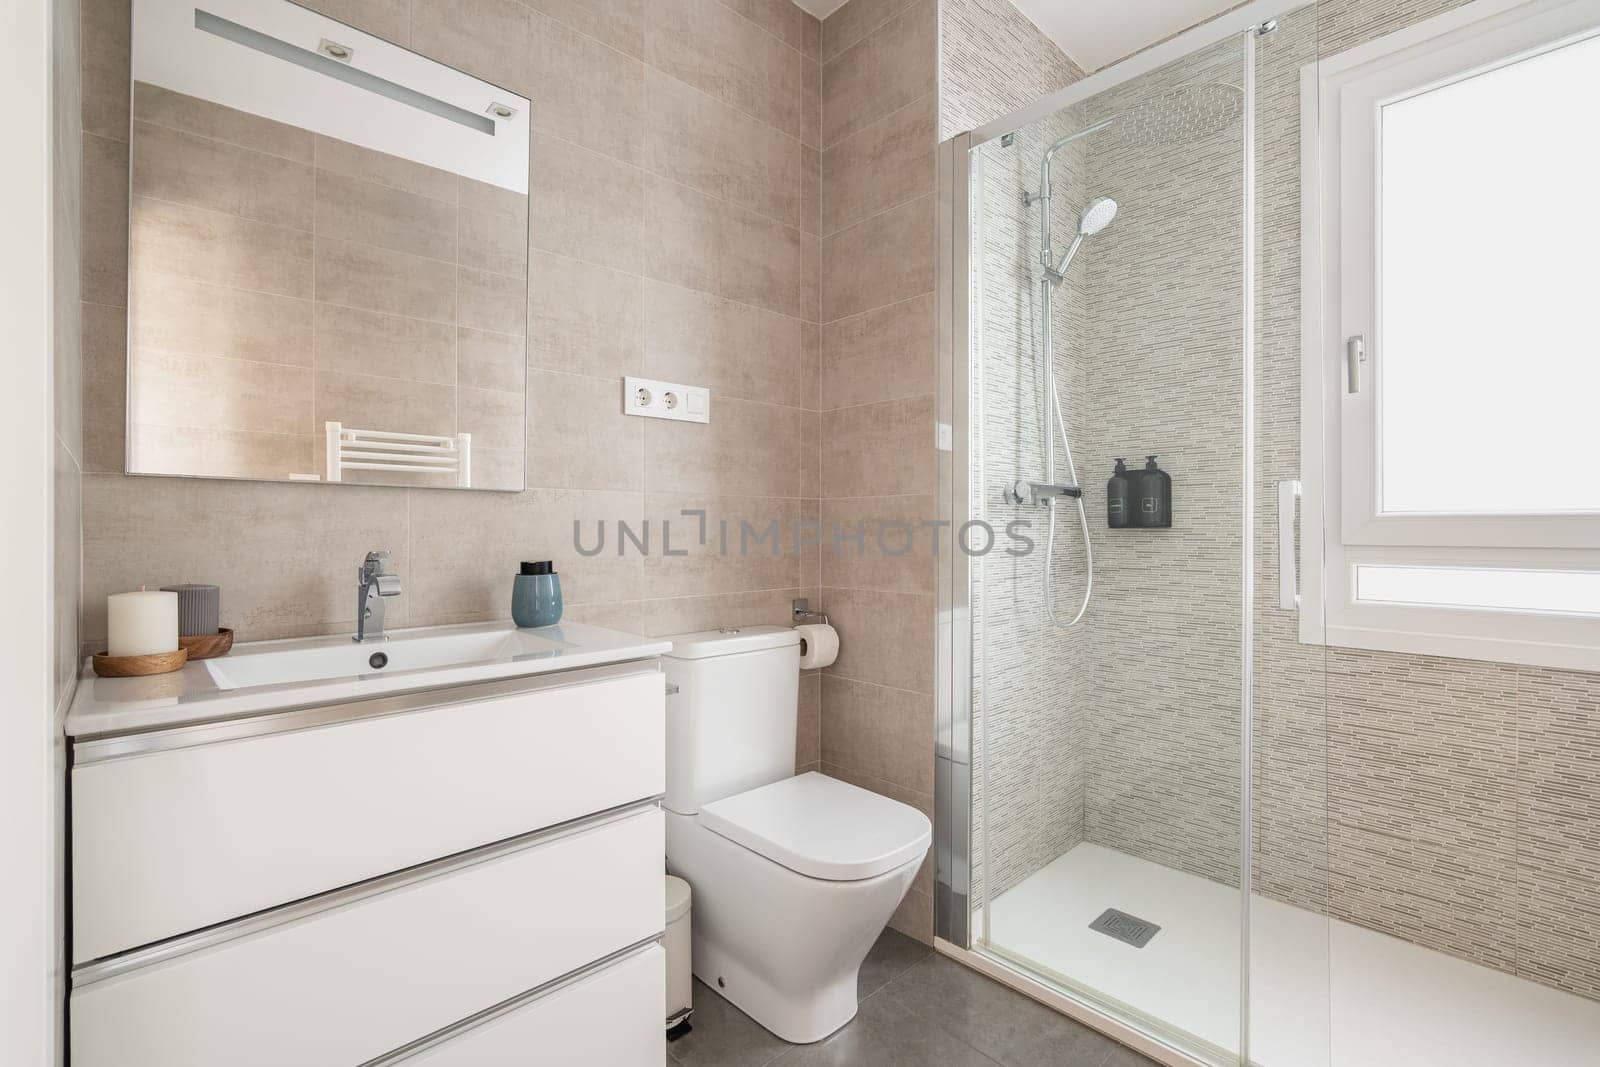 Beige tiled bathroom with glass shower doors with toilet and sink over cupboard with mirror and daylight window. Modern bathroom design concept.